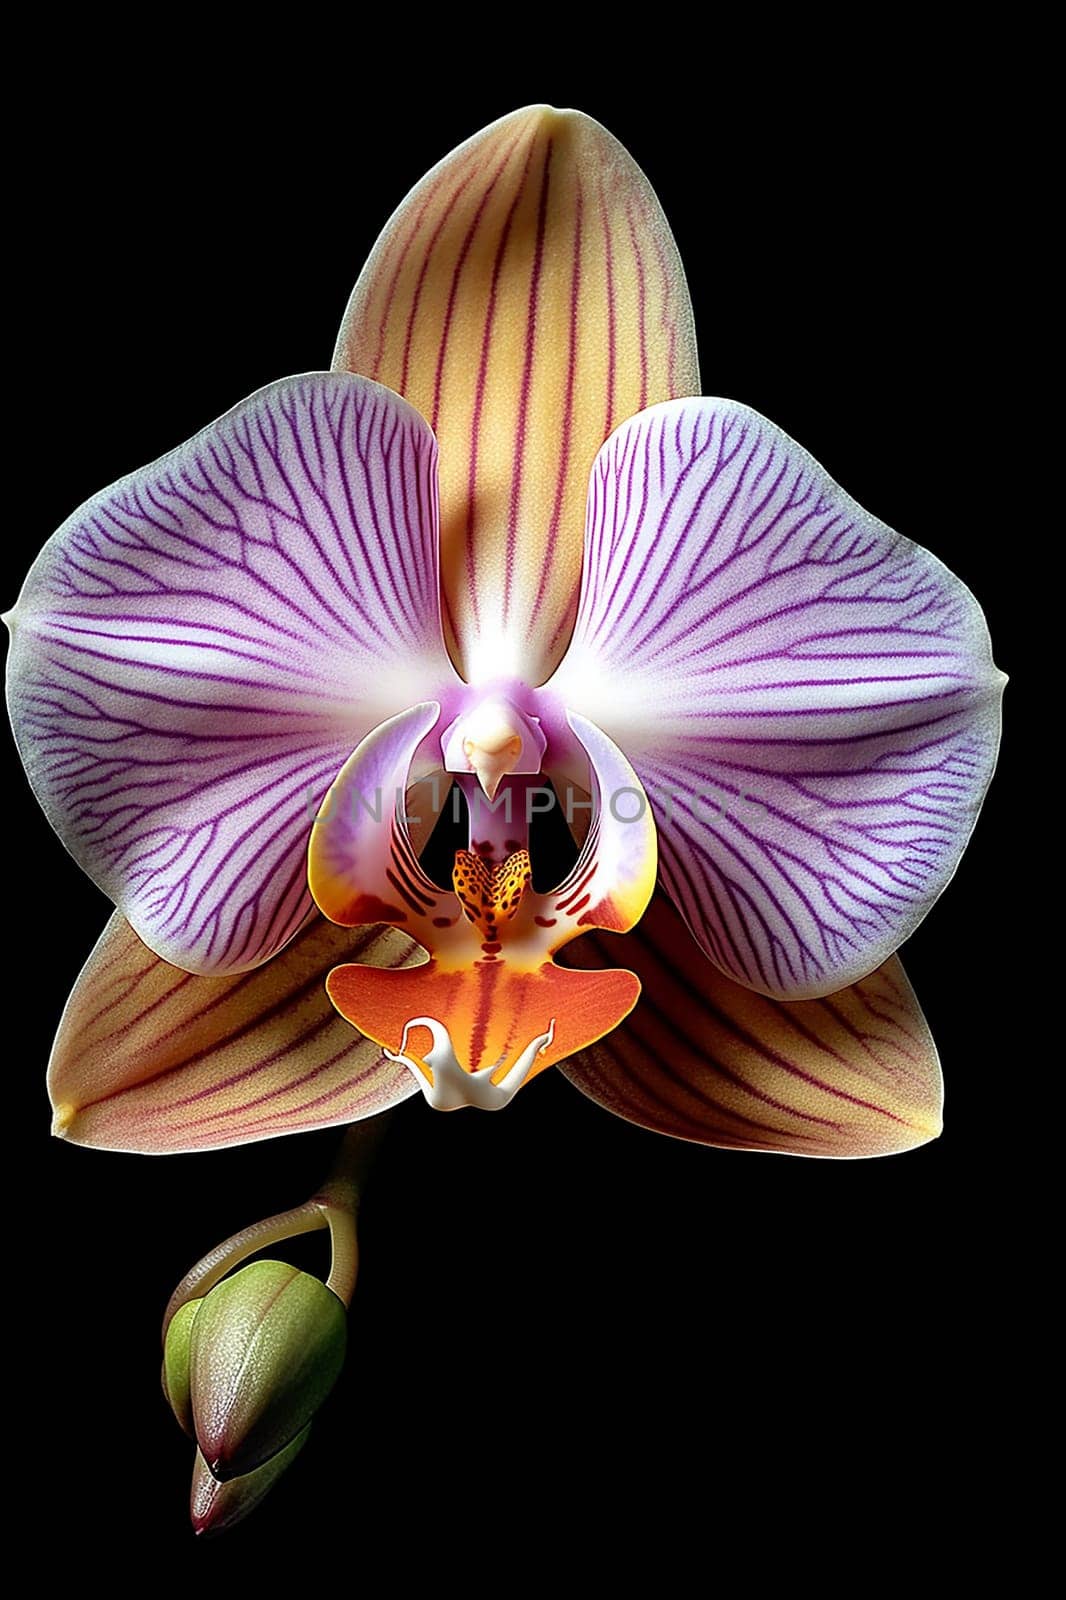 A vibrant purple and white orchid with a budding flower. by Hype2art